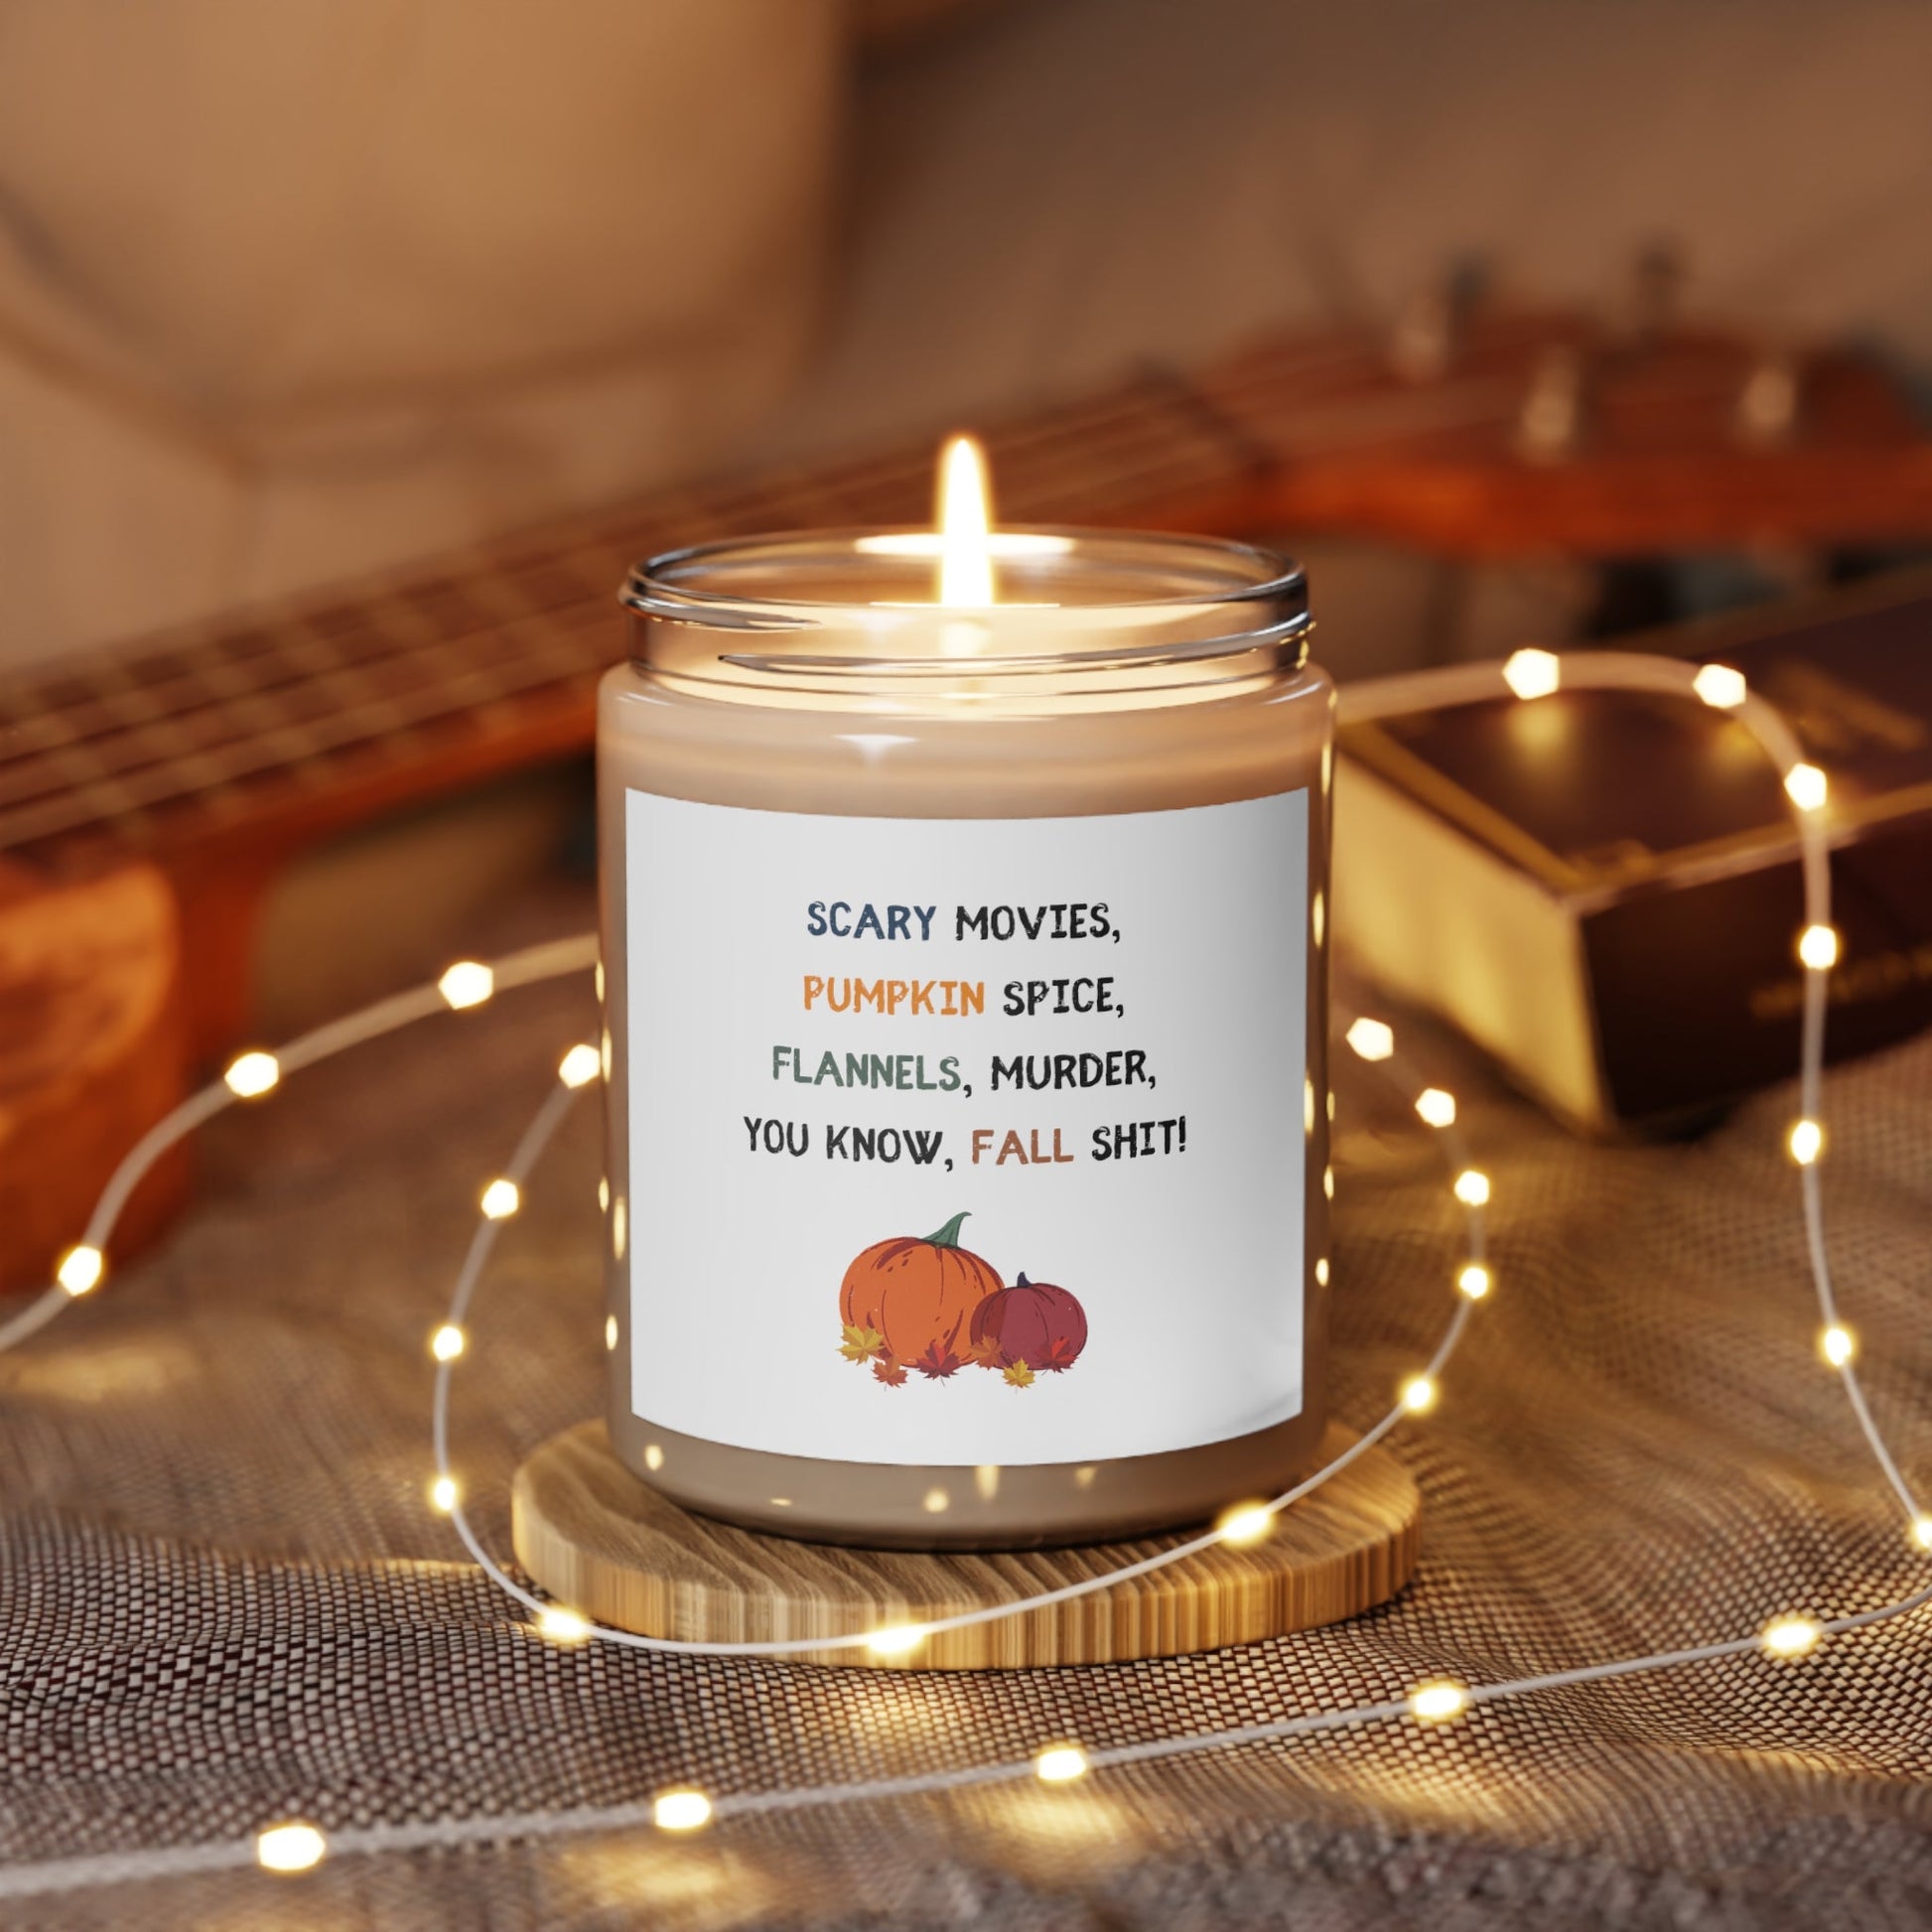 Get trendy with Fall things Scented Candle, 9oz - Home Decor available at Good Gift Company. Grab yours for $18.65 today!